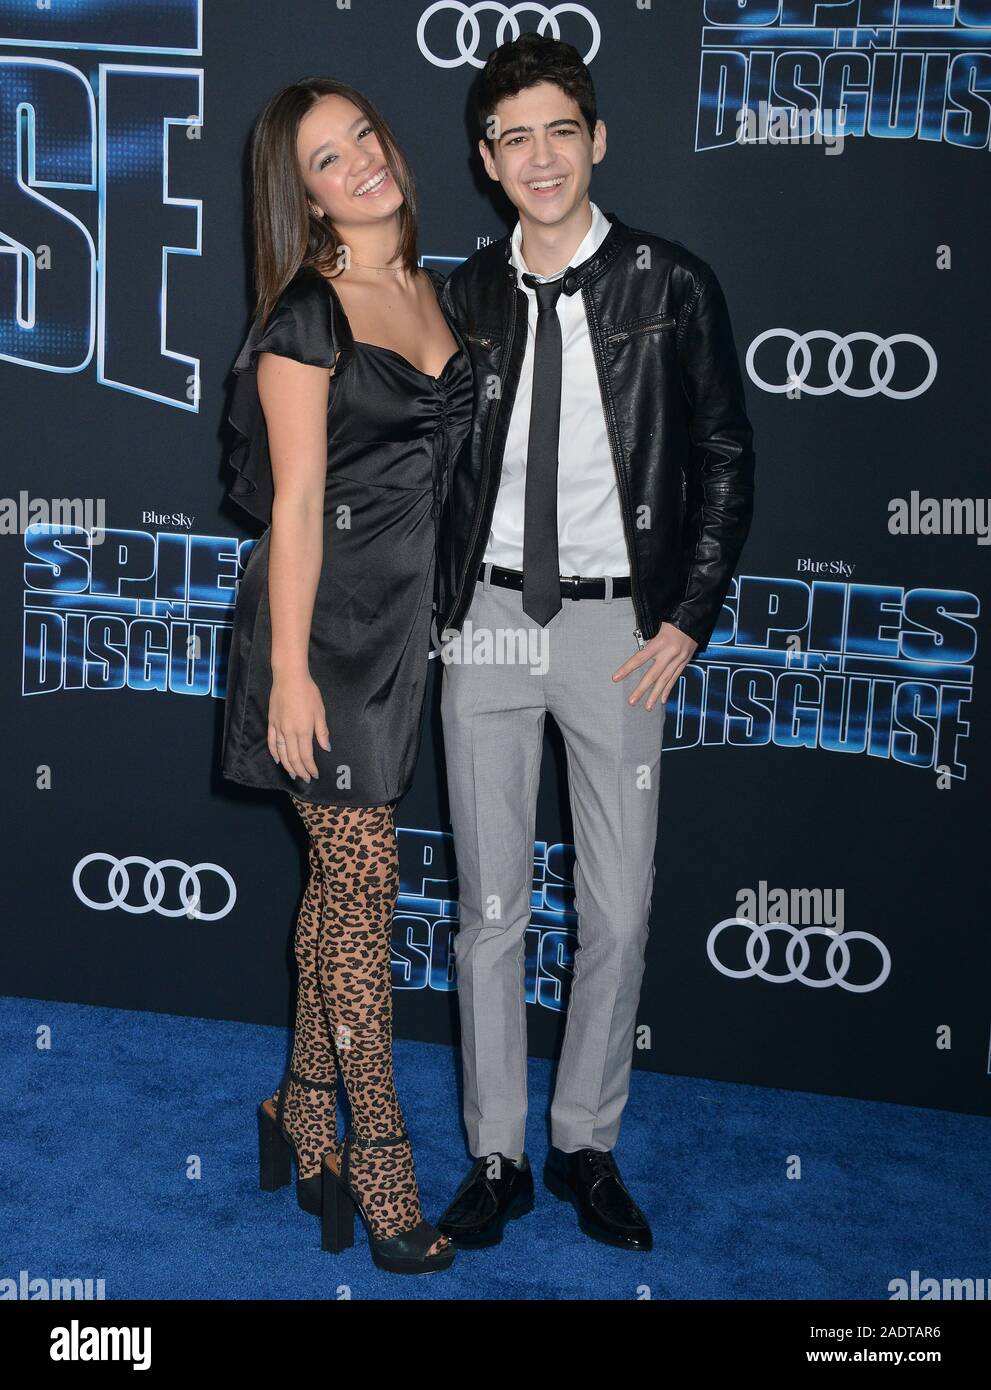 Los Angeles, USA. 4th Dec, 2019. Peyton Elizabeth Lee, Joshua Rush 043 attends the premiere of 20th Century Fox's 'Spies In Disguise' at El Capitan Theatre on December 04, 2019 in Los Angeles, Credit: Tsuni/USA/Alamy Live News Stock Photo